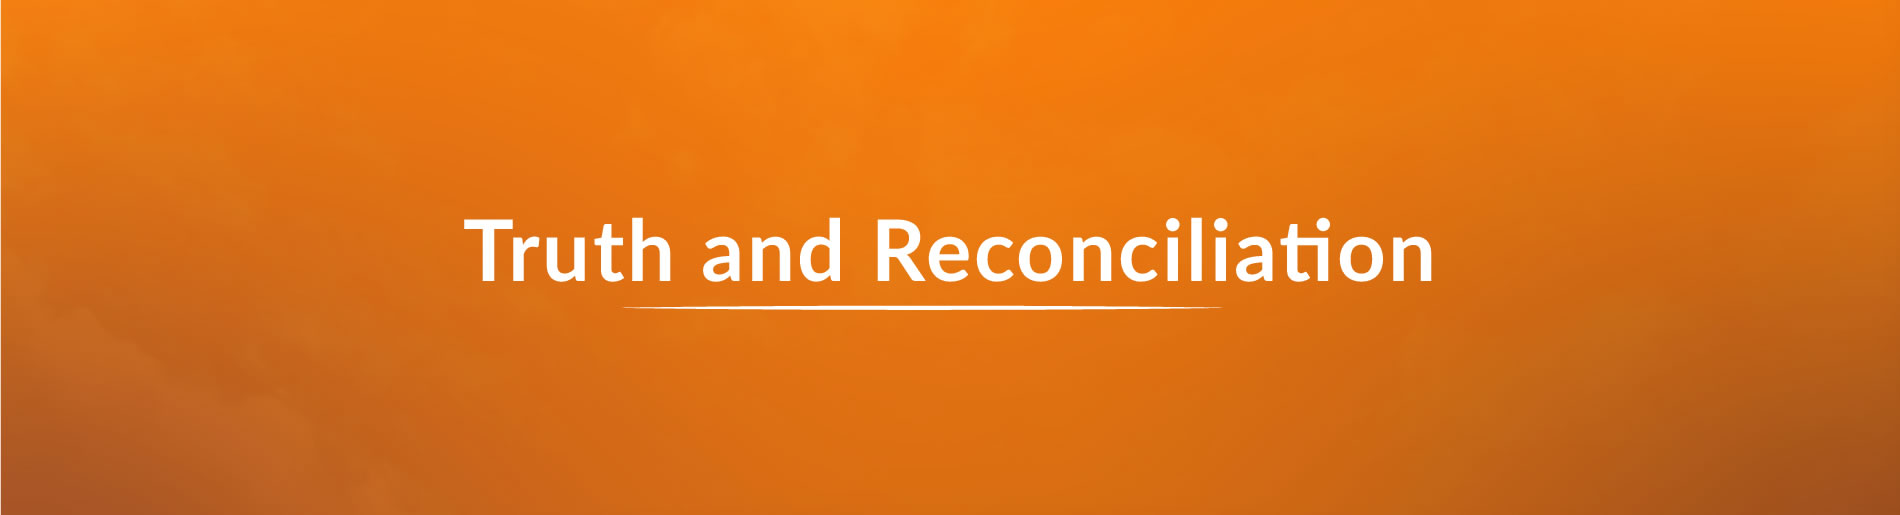 Truth and Reconciliation banner